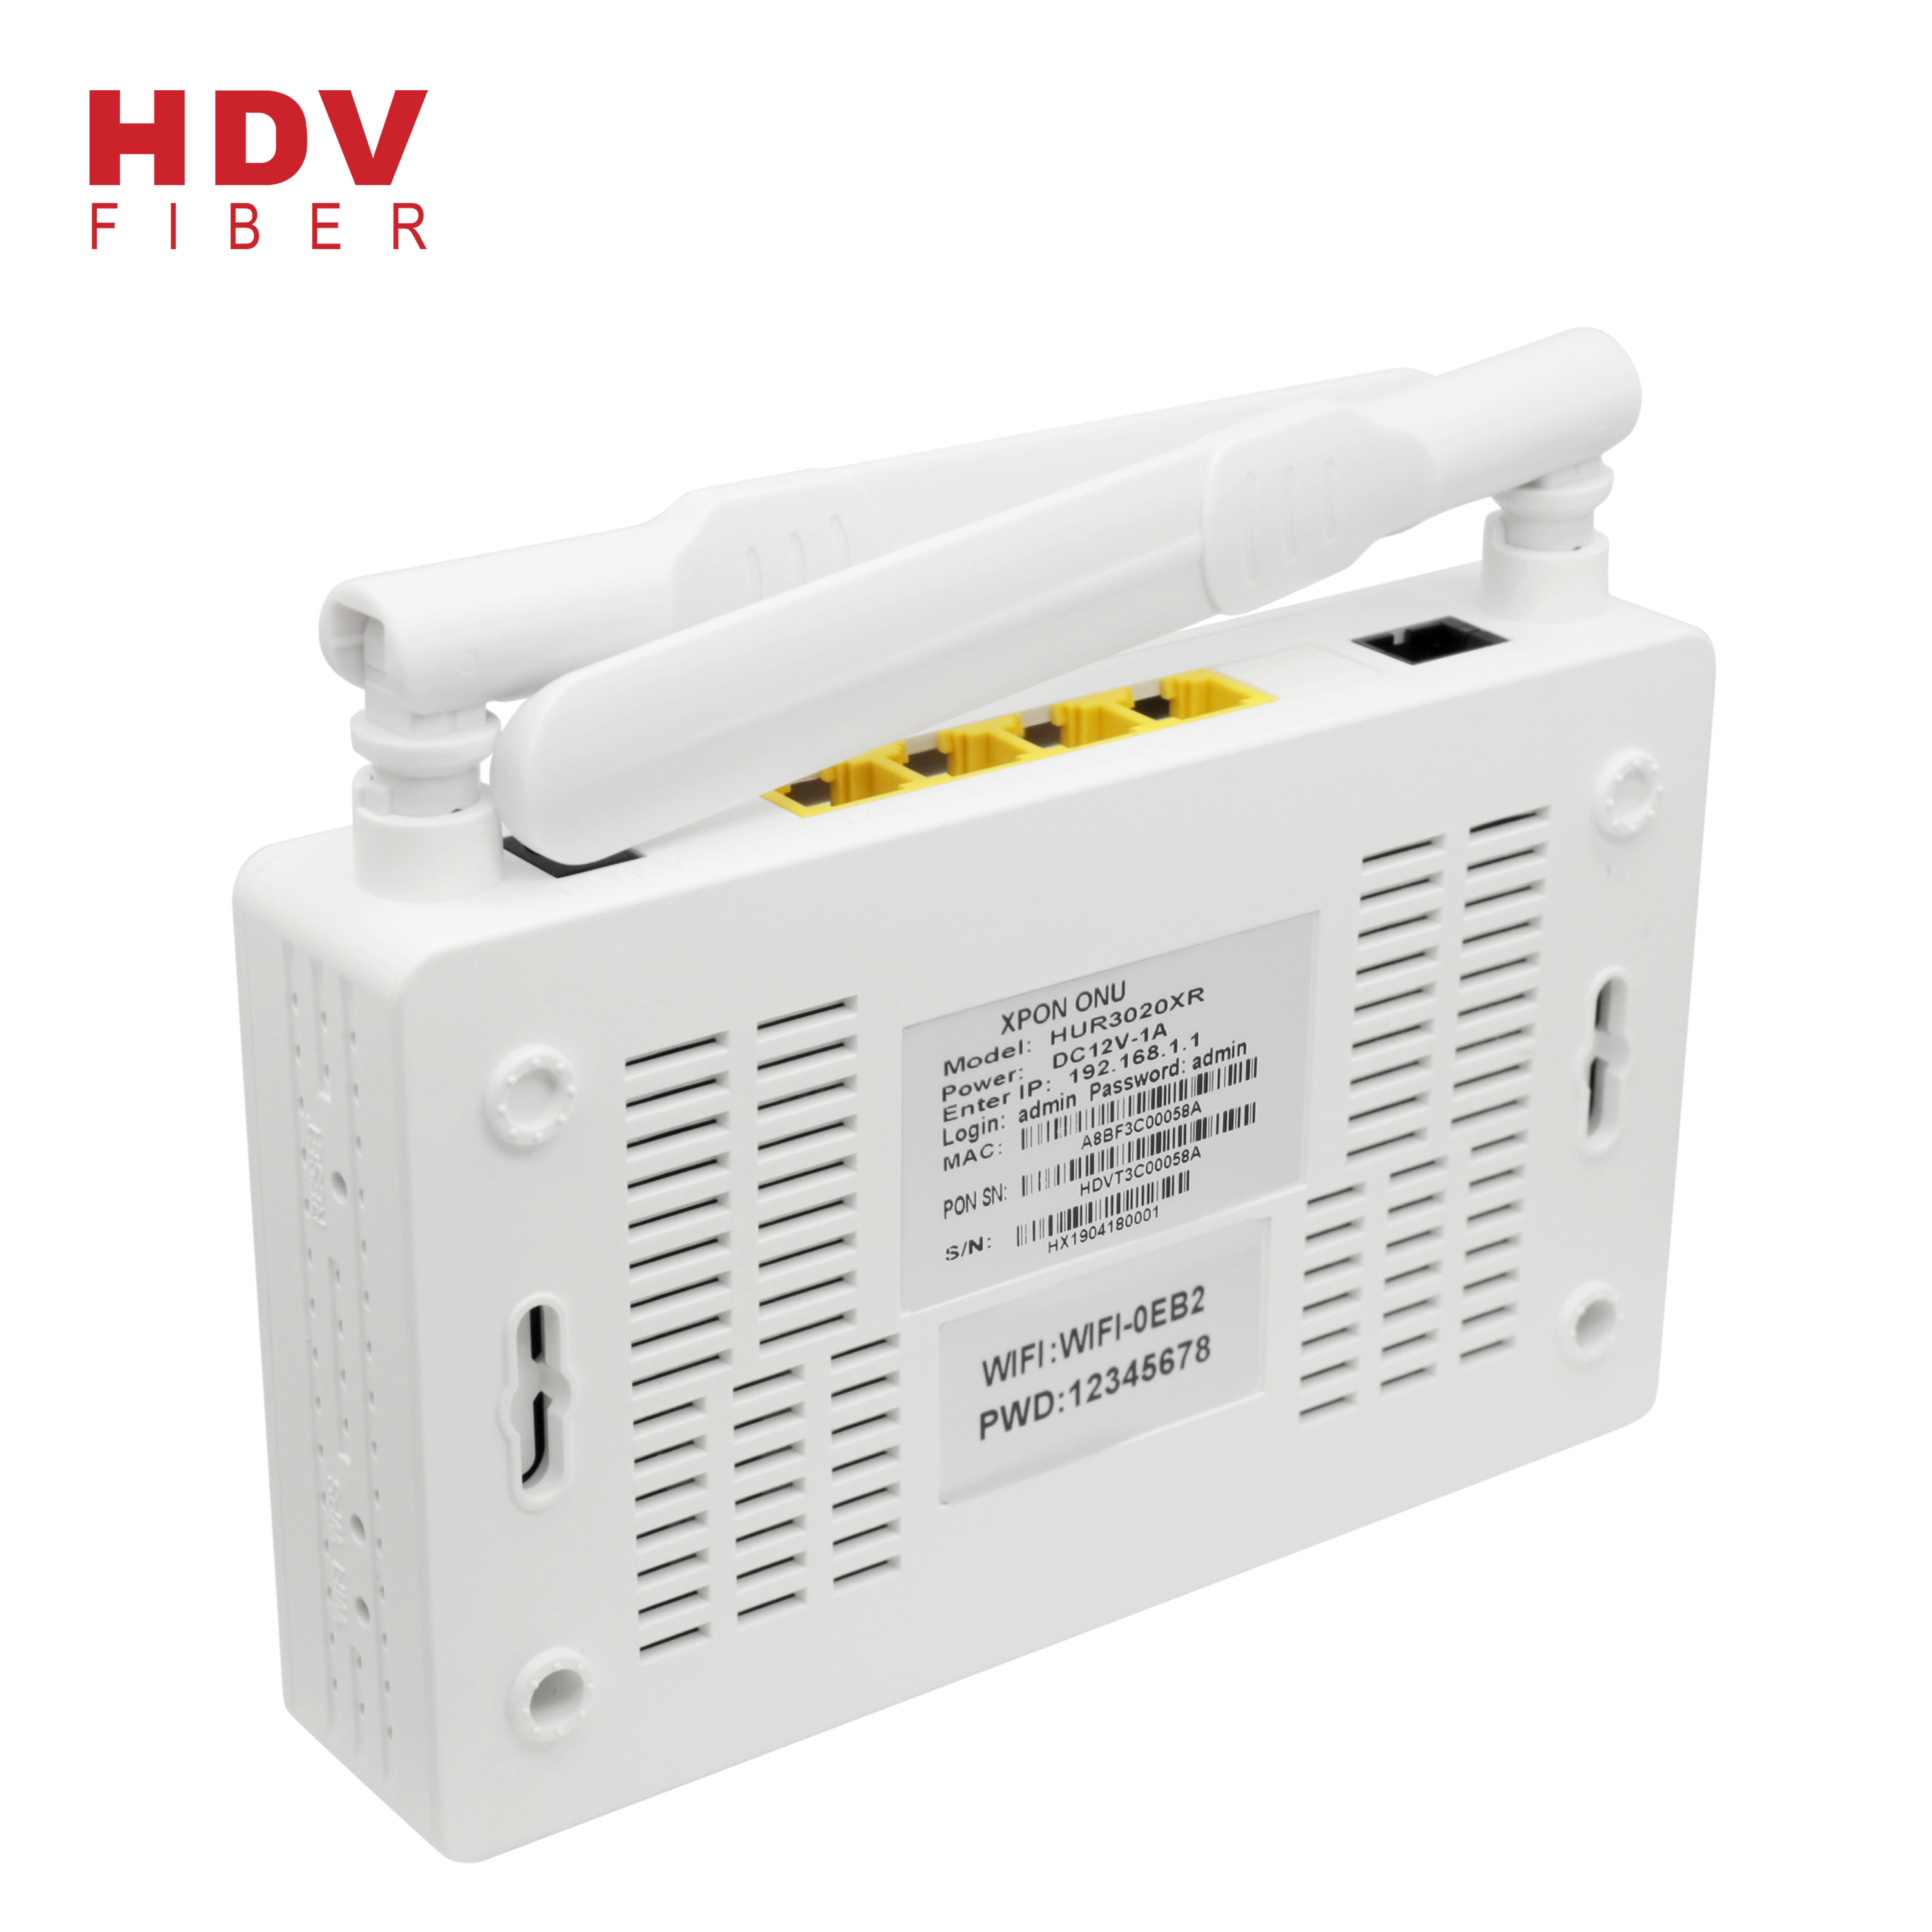 China Well Designed Onu Huawei Wifi Gigabit Compatible Huawei Wifi Zte F660 Used Pon 1ge 3fe Xpon Onu Hdv Manufacturer And Supplier Hdv